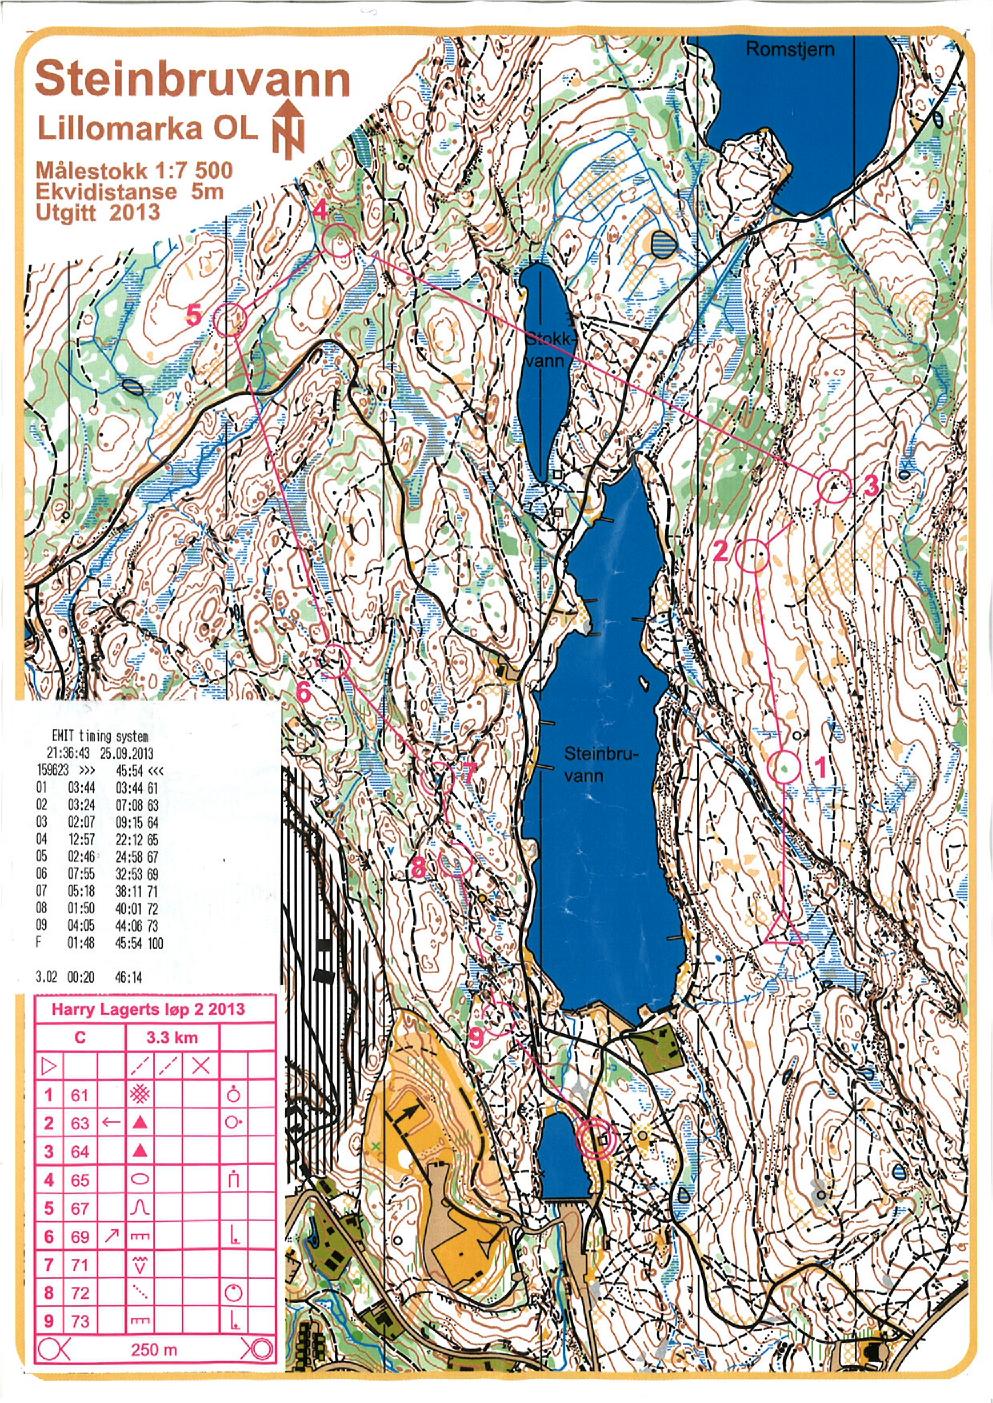 Harry Lagerts Nattcup Løp 2 C-Lokal (2013-09-25)